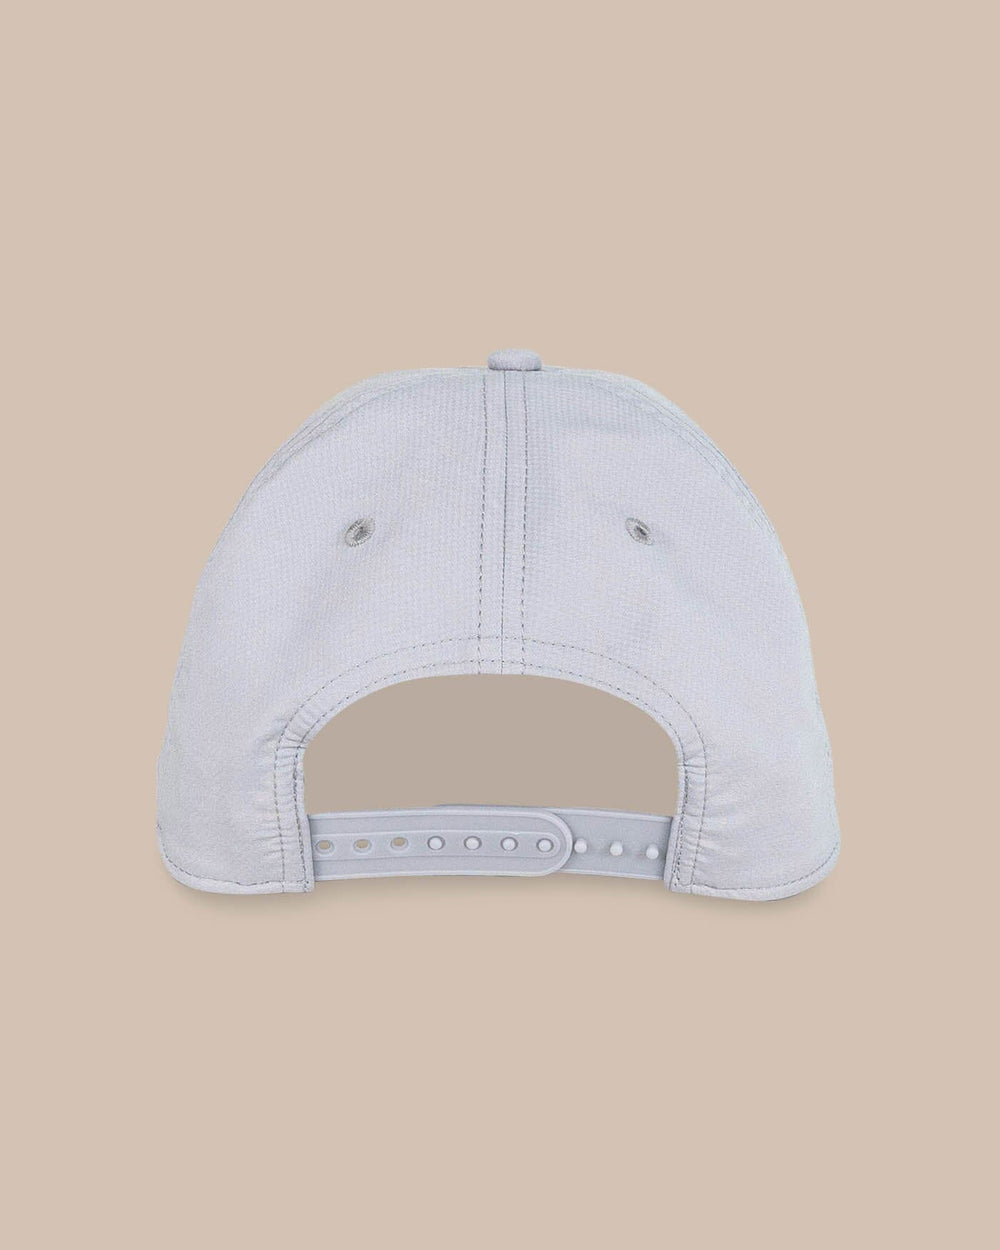 The back view of the Southern Tide Rubber Skipjack Performance Hat by Southern Tide - Steel Grey